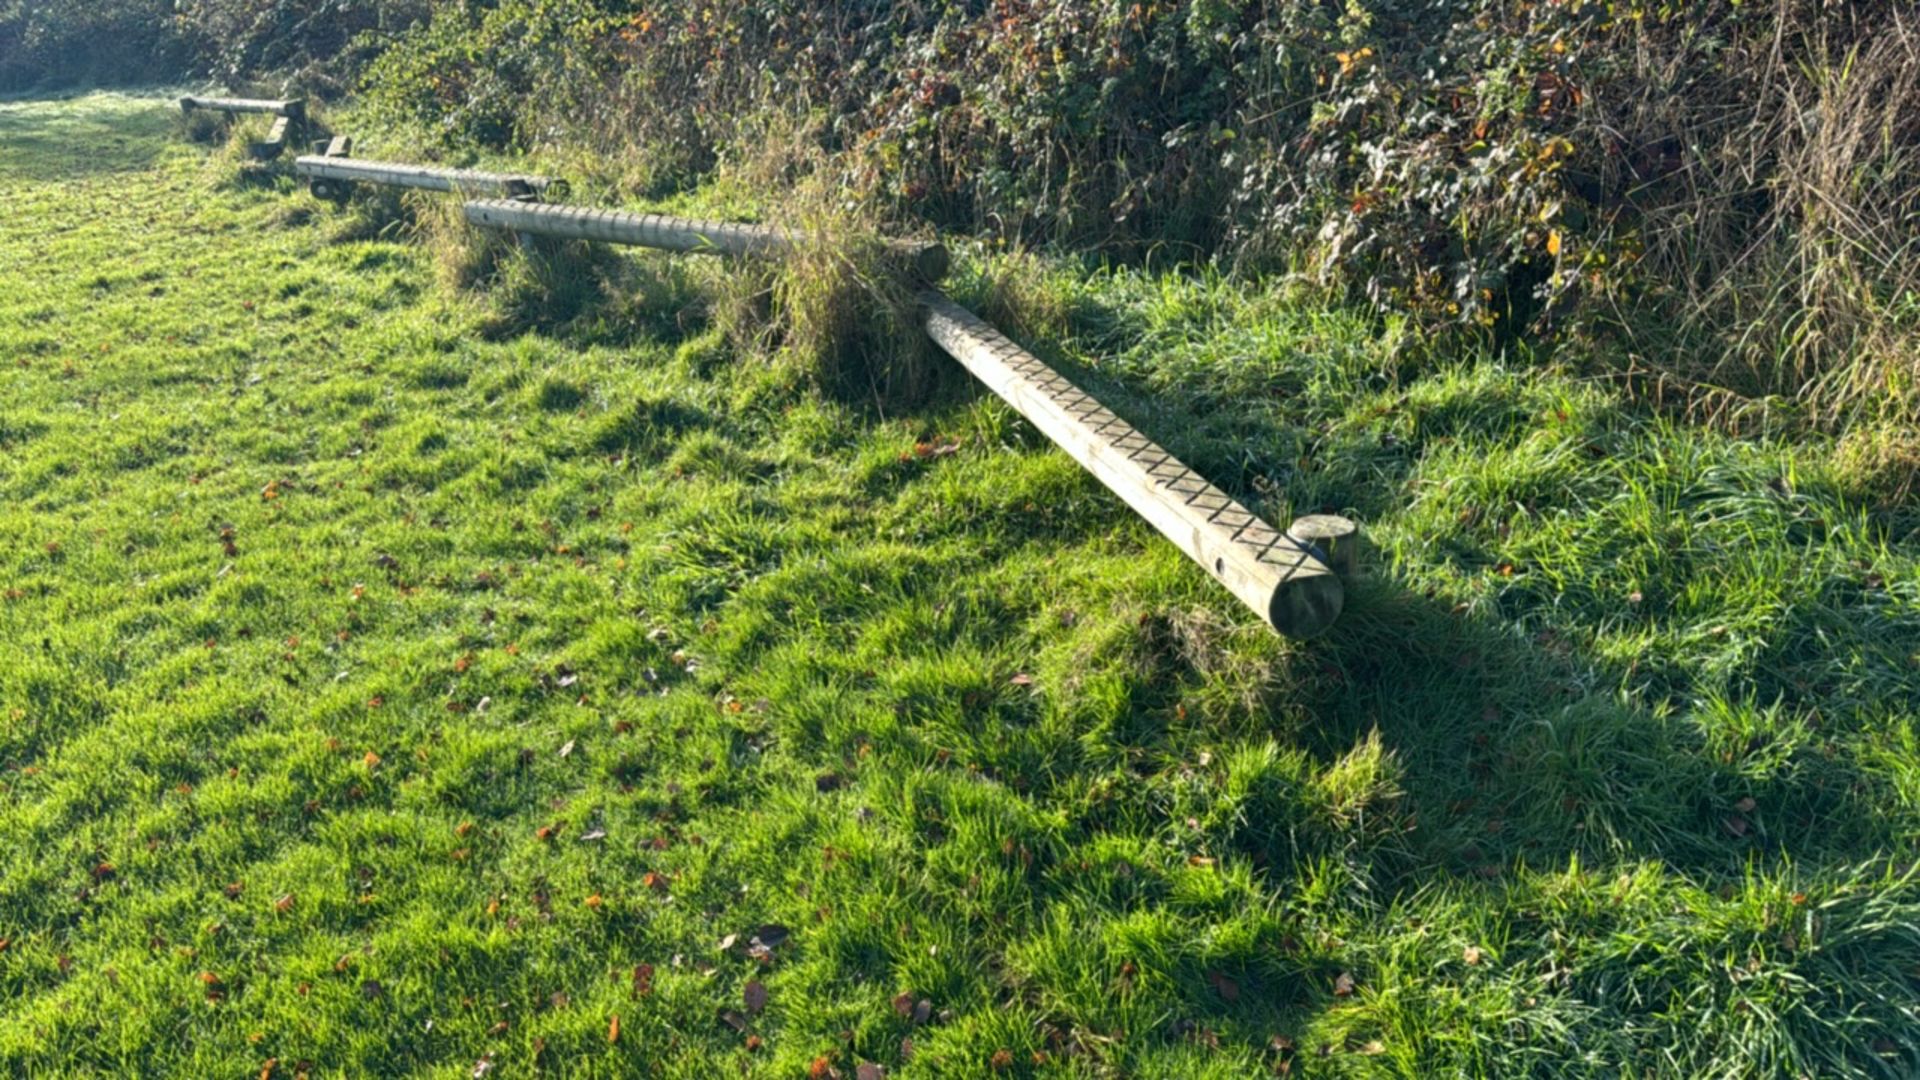 Wooden Assault Course - Image 11 of 12